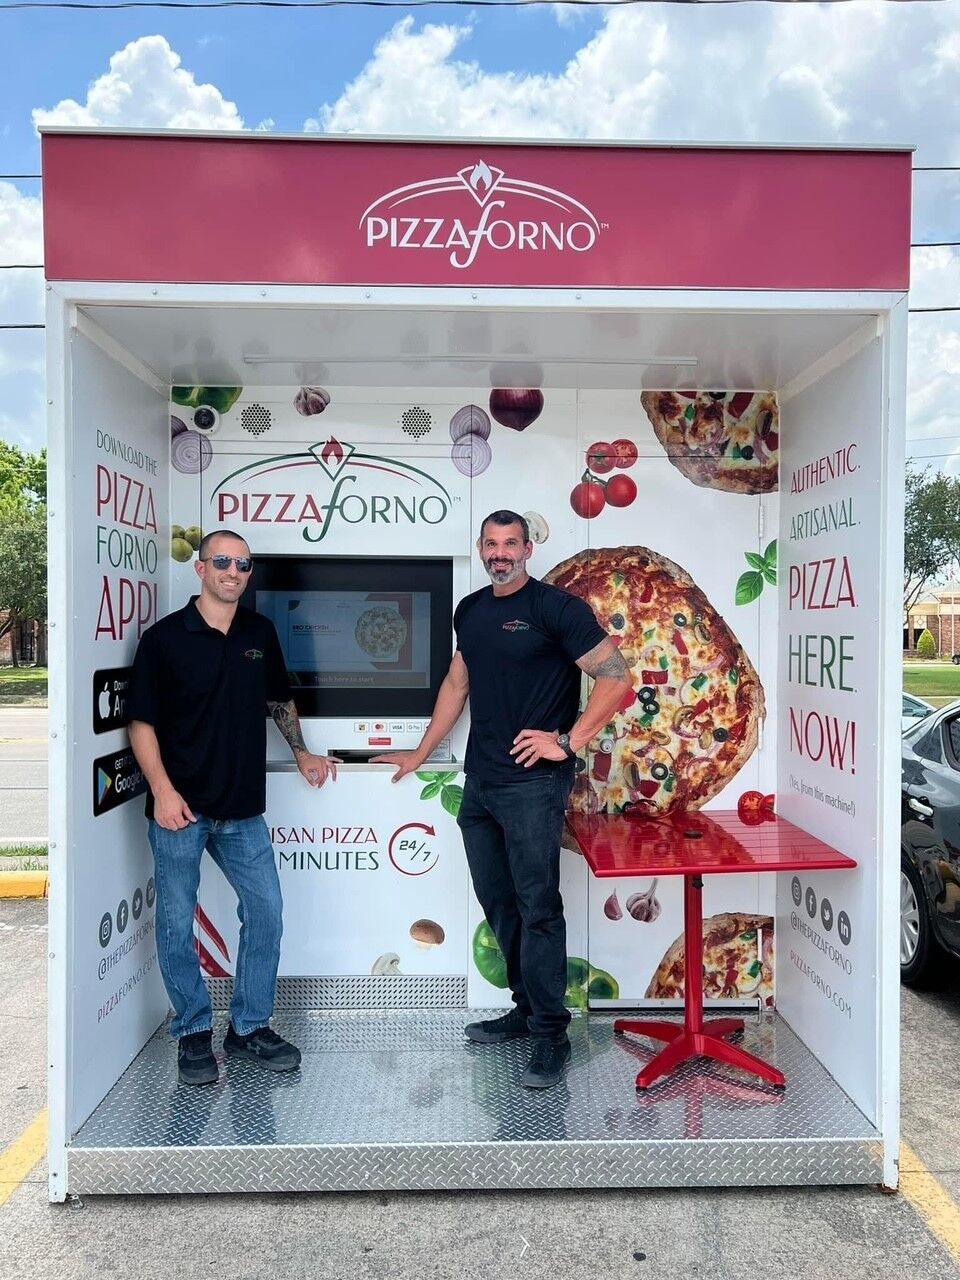 Could Pizza Vending Machines Be Coming To North Dakota?